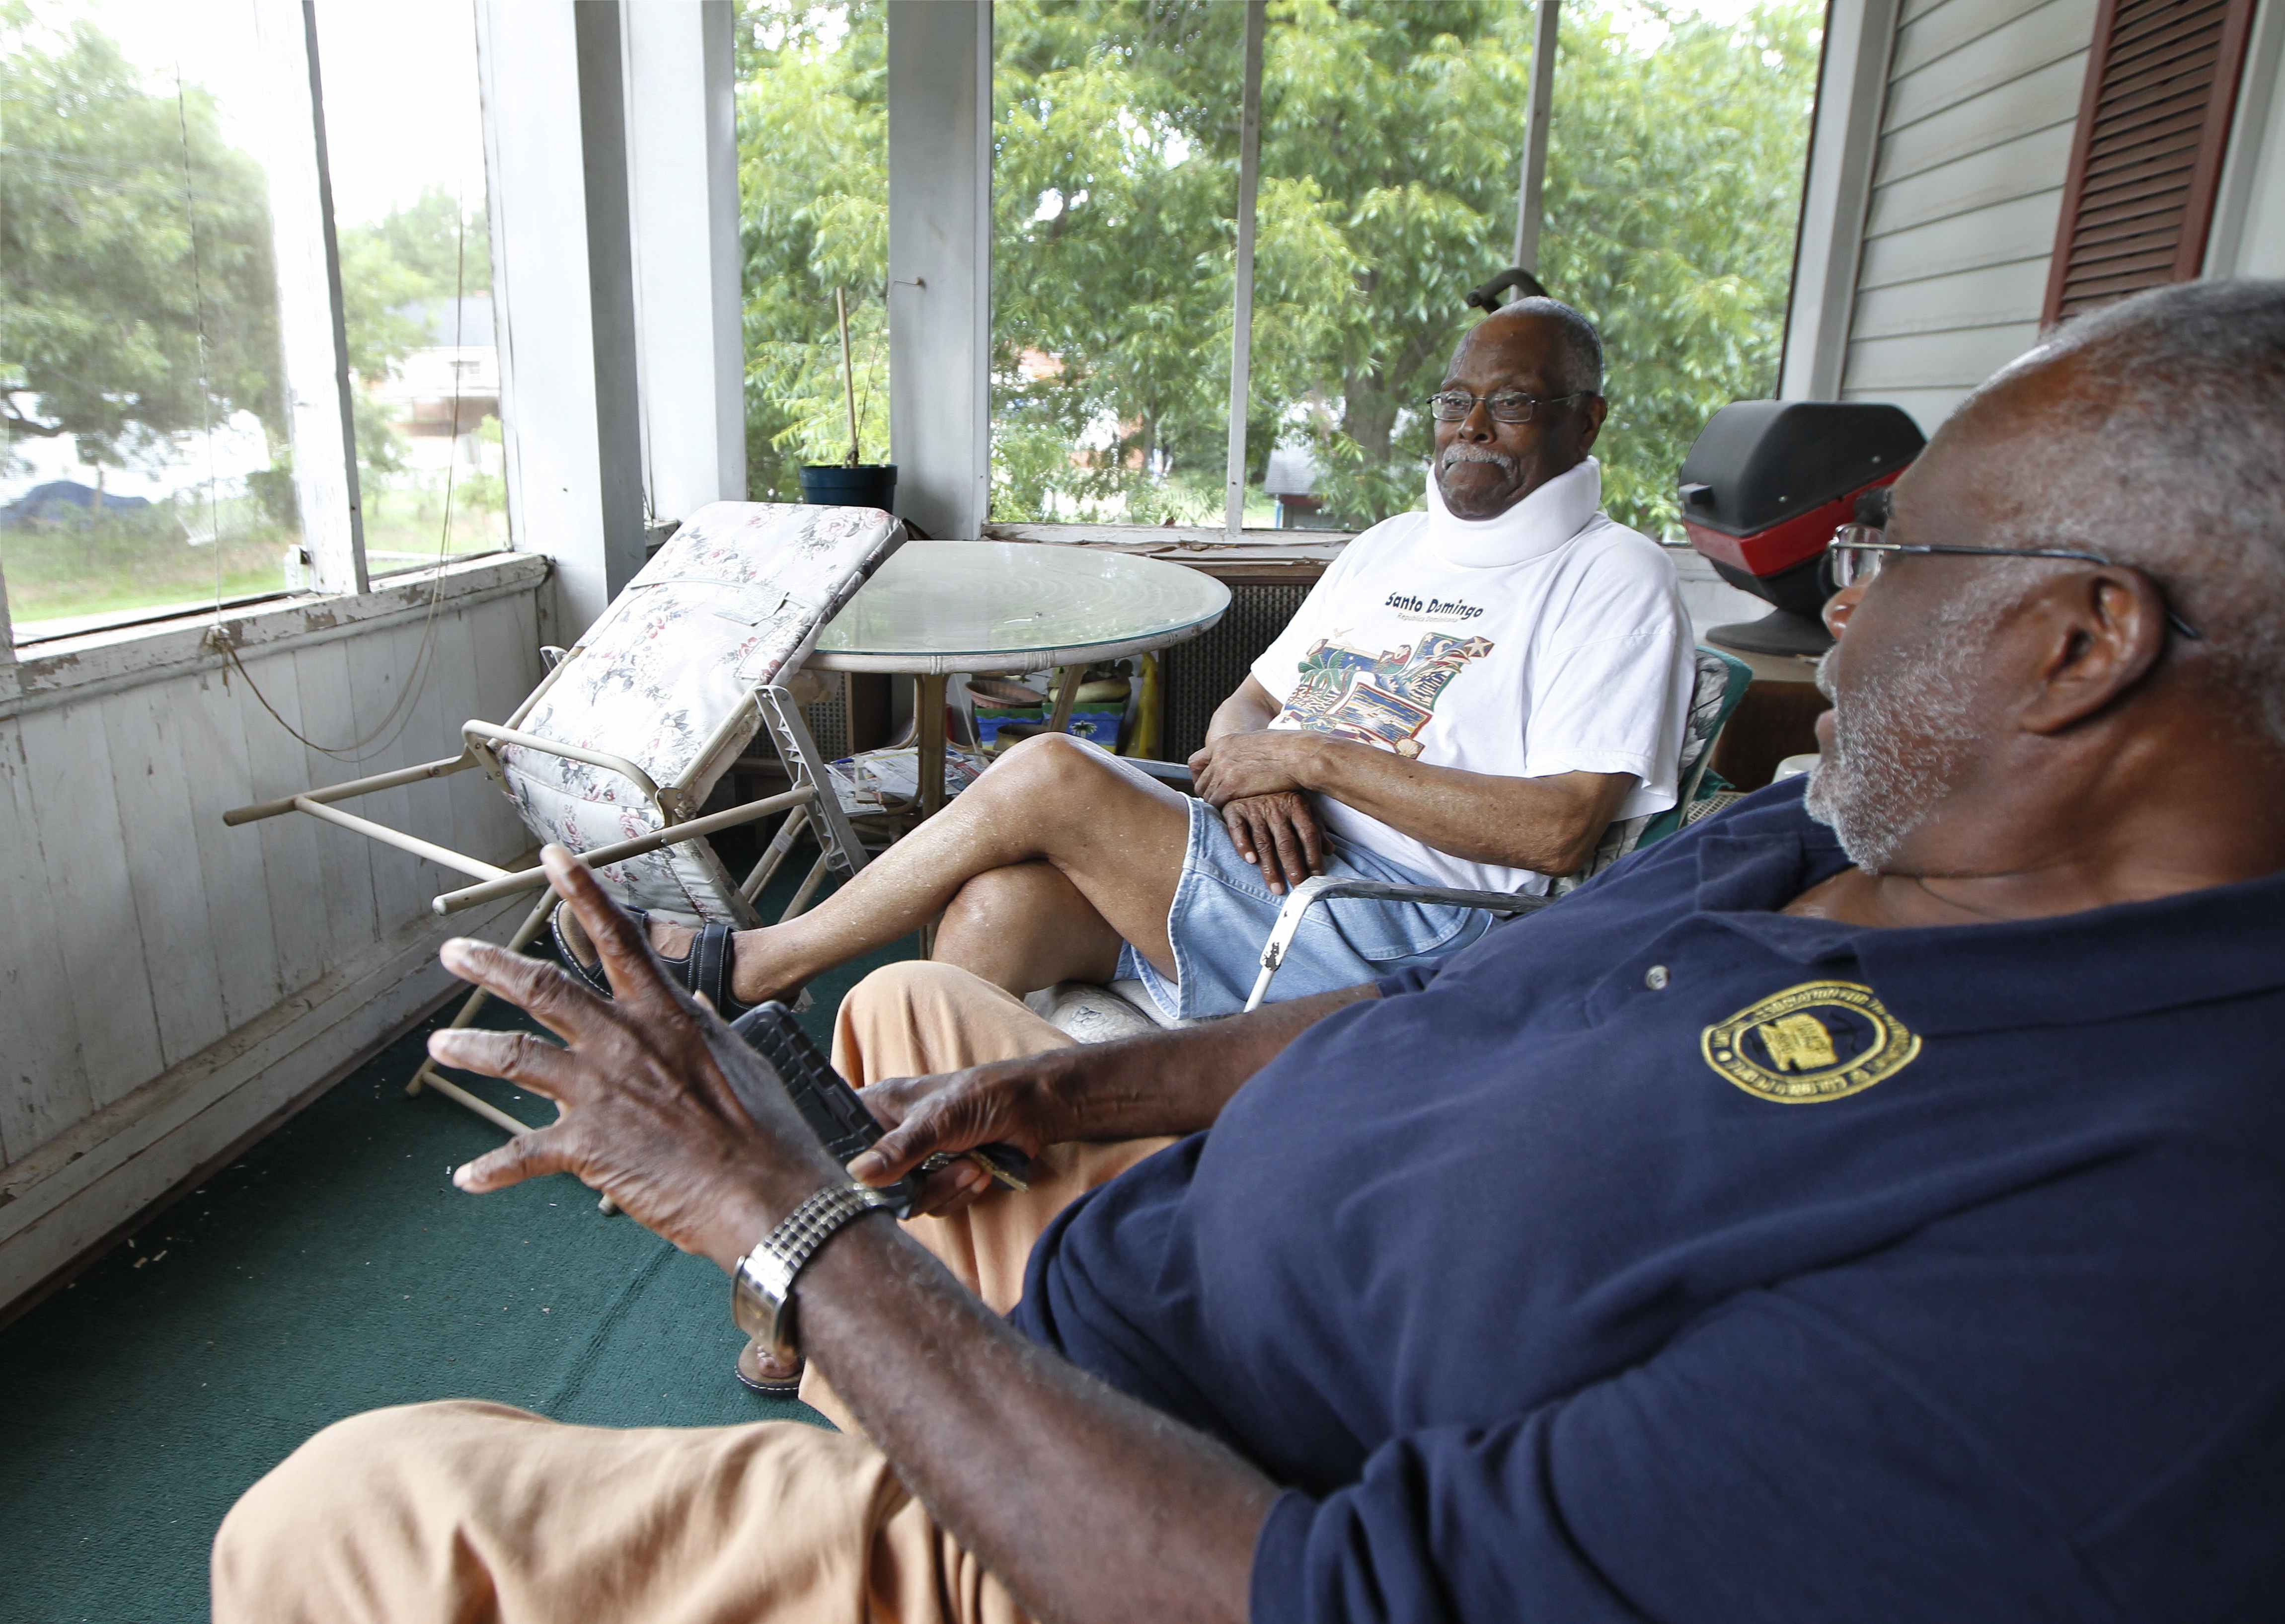 Louis Brooks (L), talks with Henry Wilder with the Thomaston-Upson County Branch of the NAACP in the Lincoln Park neighborhood in Thomaston, Georgia, U.S. August 16, 2016. REUTERS/Tami Chappell